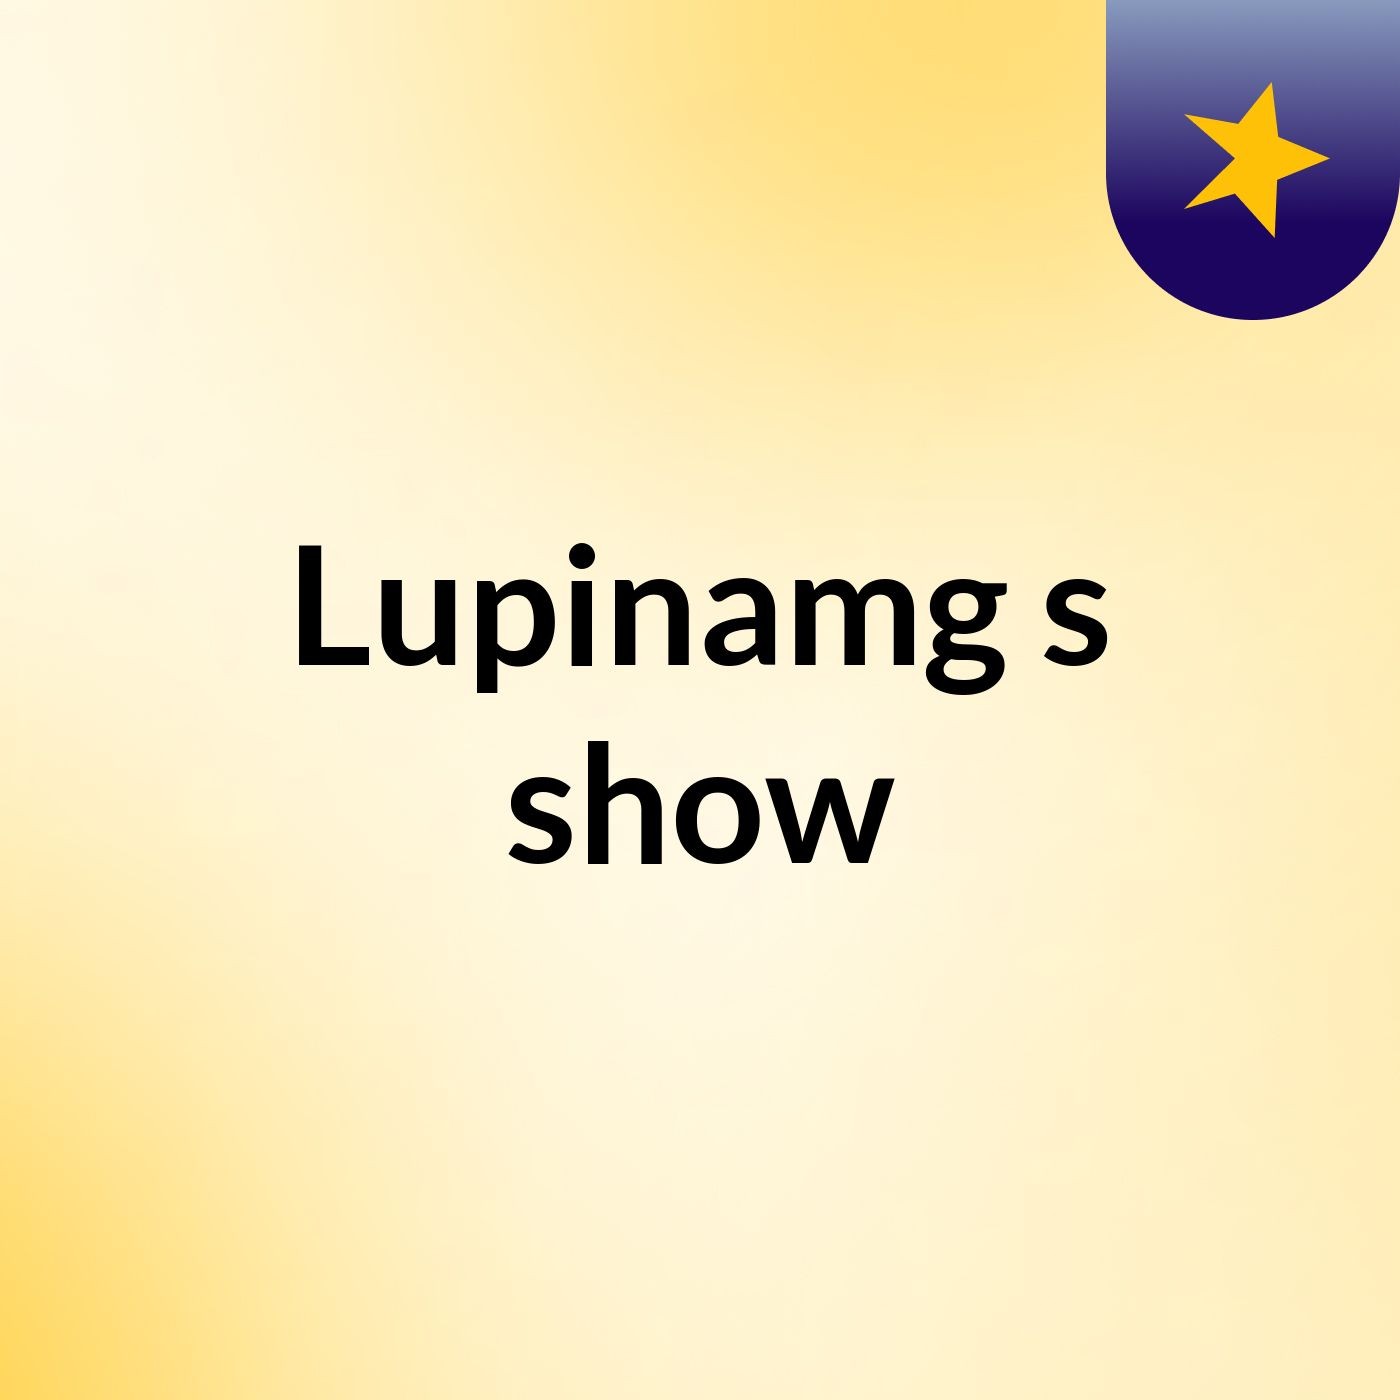 Lupinamg's show